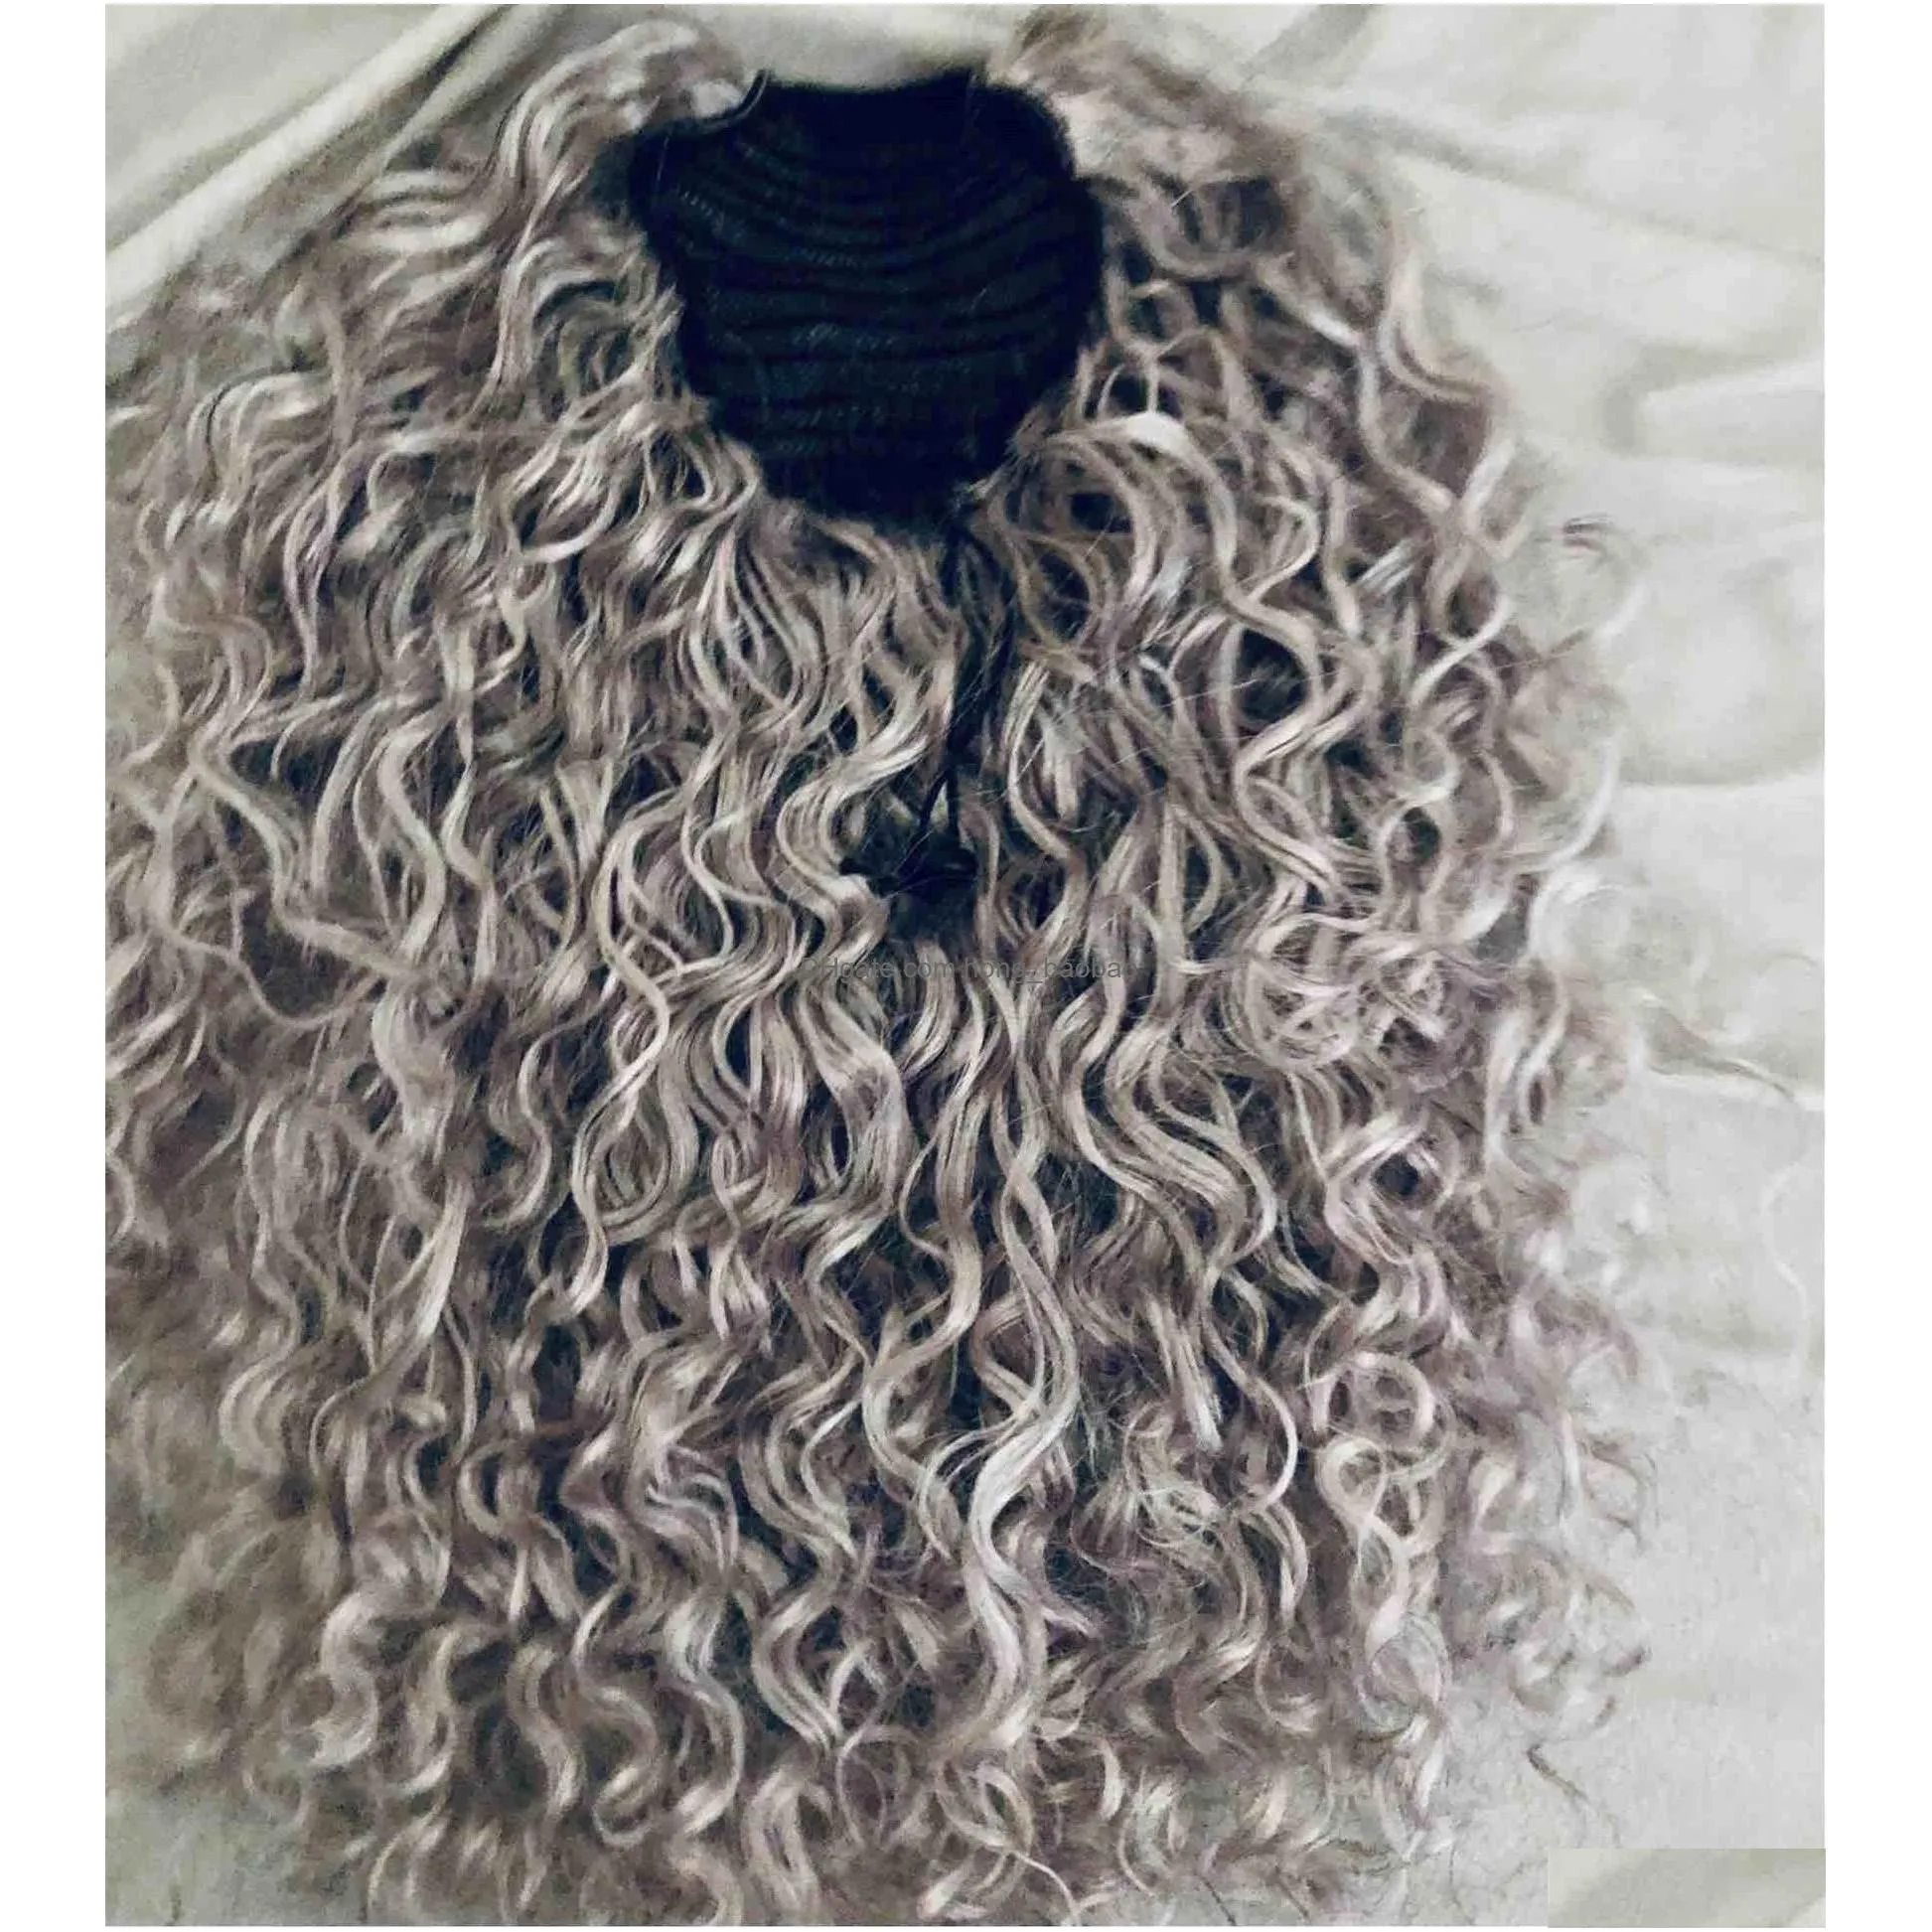 silver grey kinky curly ponytail hair extension salt and pepper natural wavy curl gray human hair pony tail hairpiece clip in